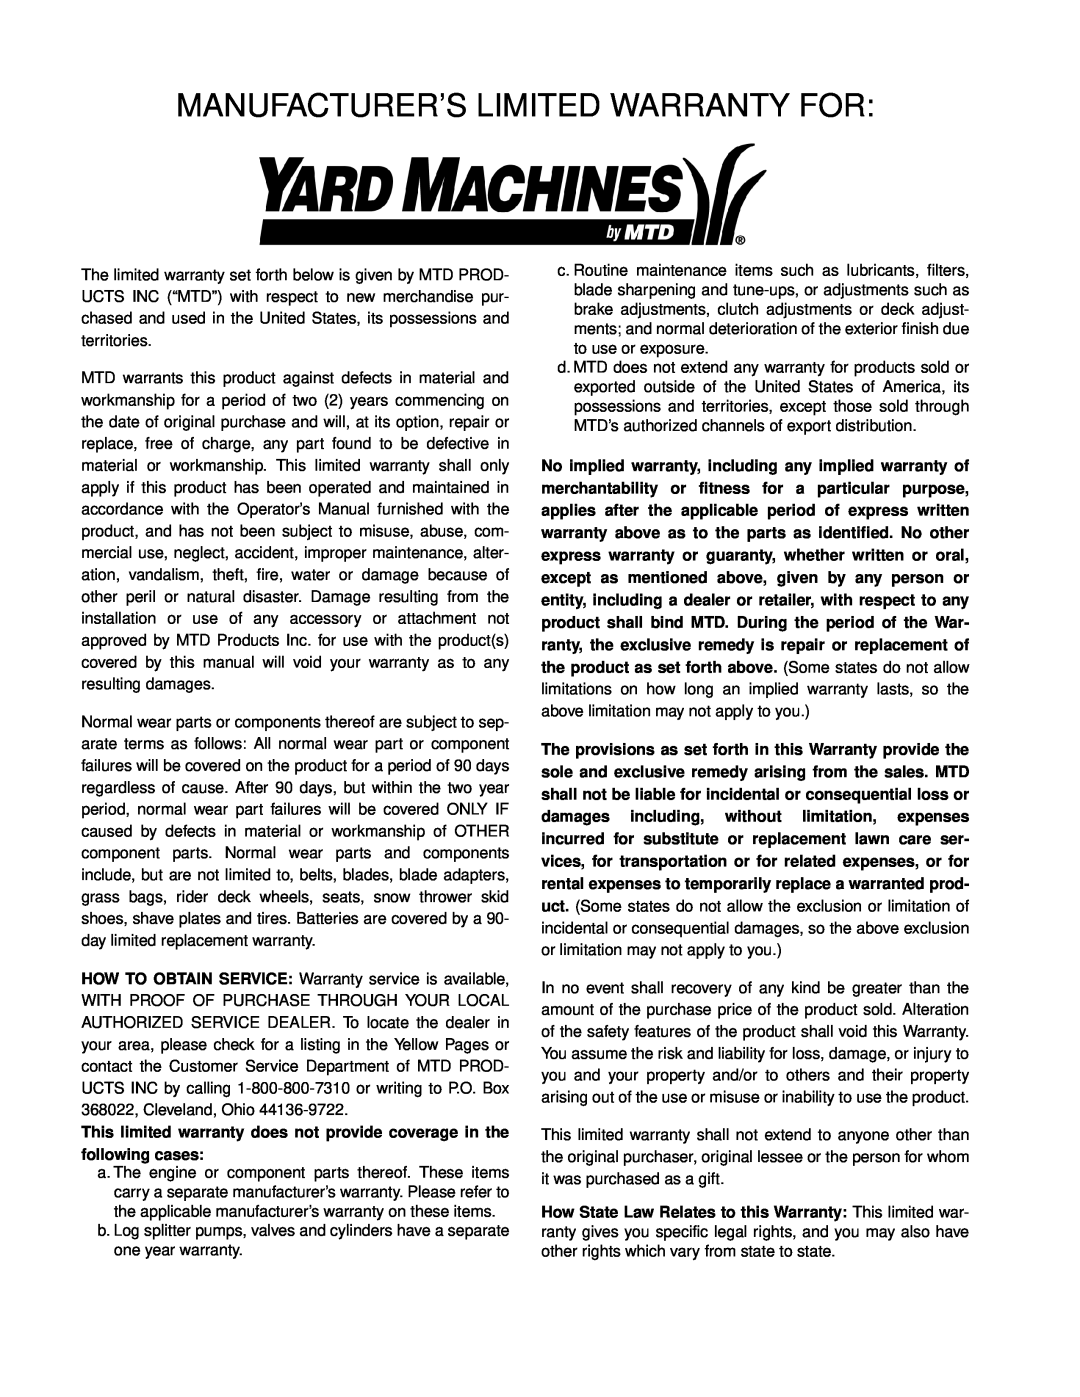 Yard Machines 829, 810 manual Manufacturer’S Limited Warranty For 